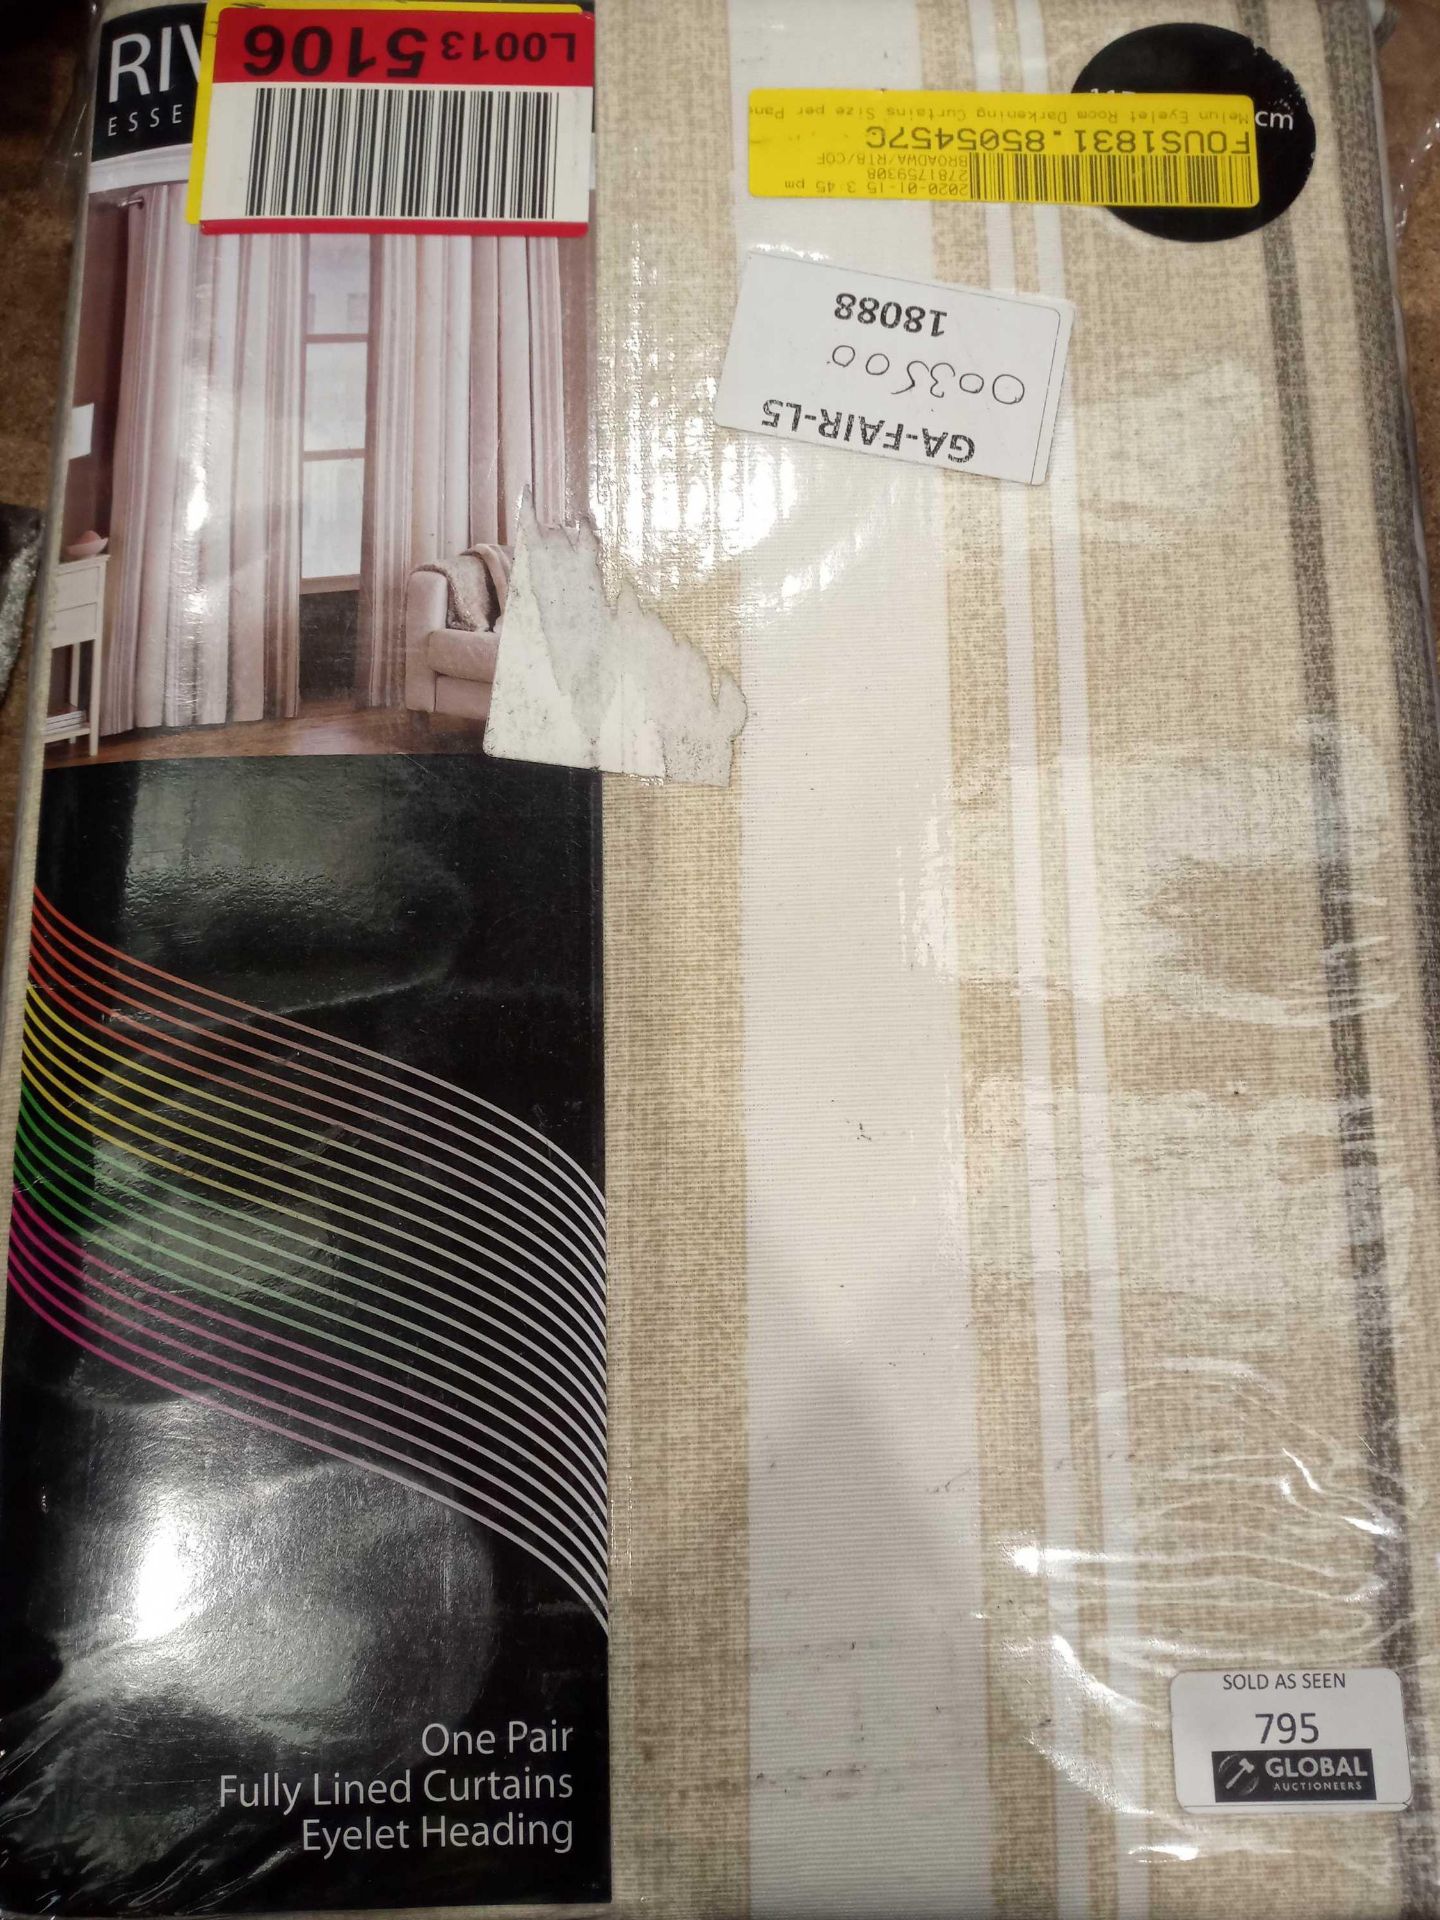 Combined RRP £75 Lot To Contain 2 Pairs Of Curtains - Image 2 of 2